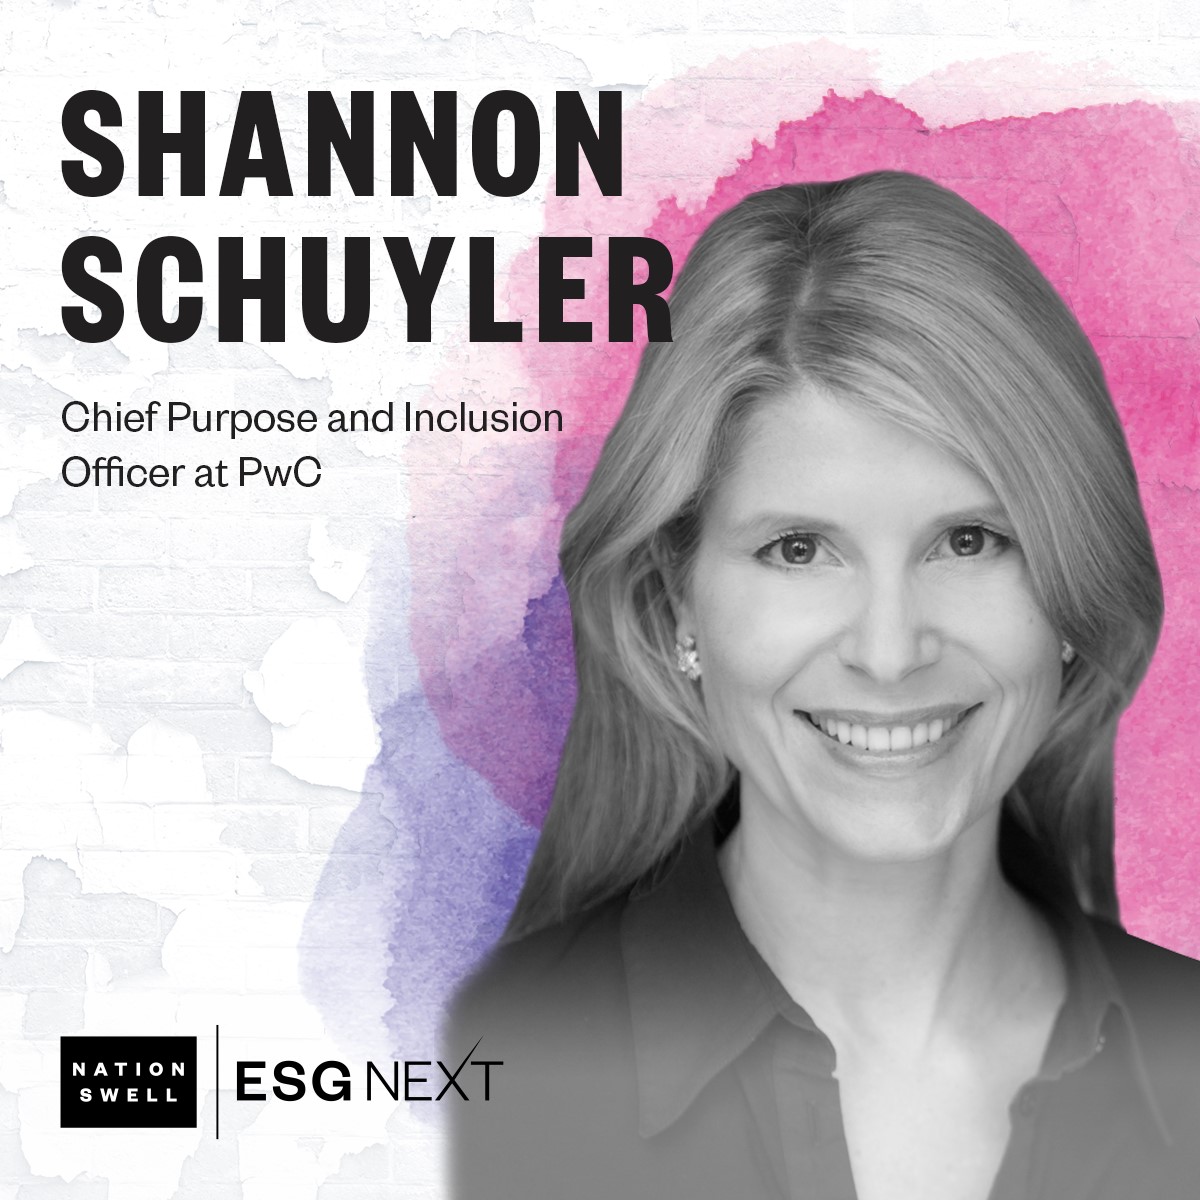 I am honored to be recognized on this year’s @NationSwell ESG Next list. It was a pleasure to share the strategic initiatives at @PwCUS involving #ESG, #DEI and building trust. It will take the collective effort of us all to drive sustainable change! bit.ly/3ozM0m1